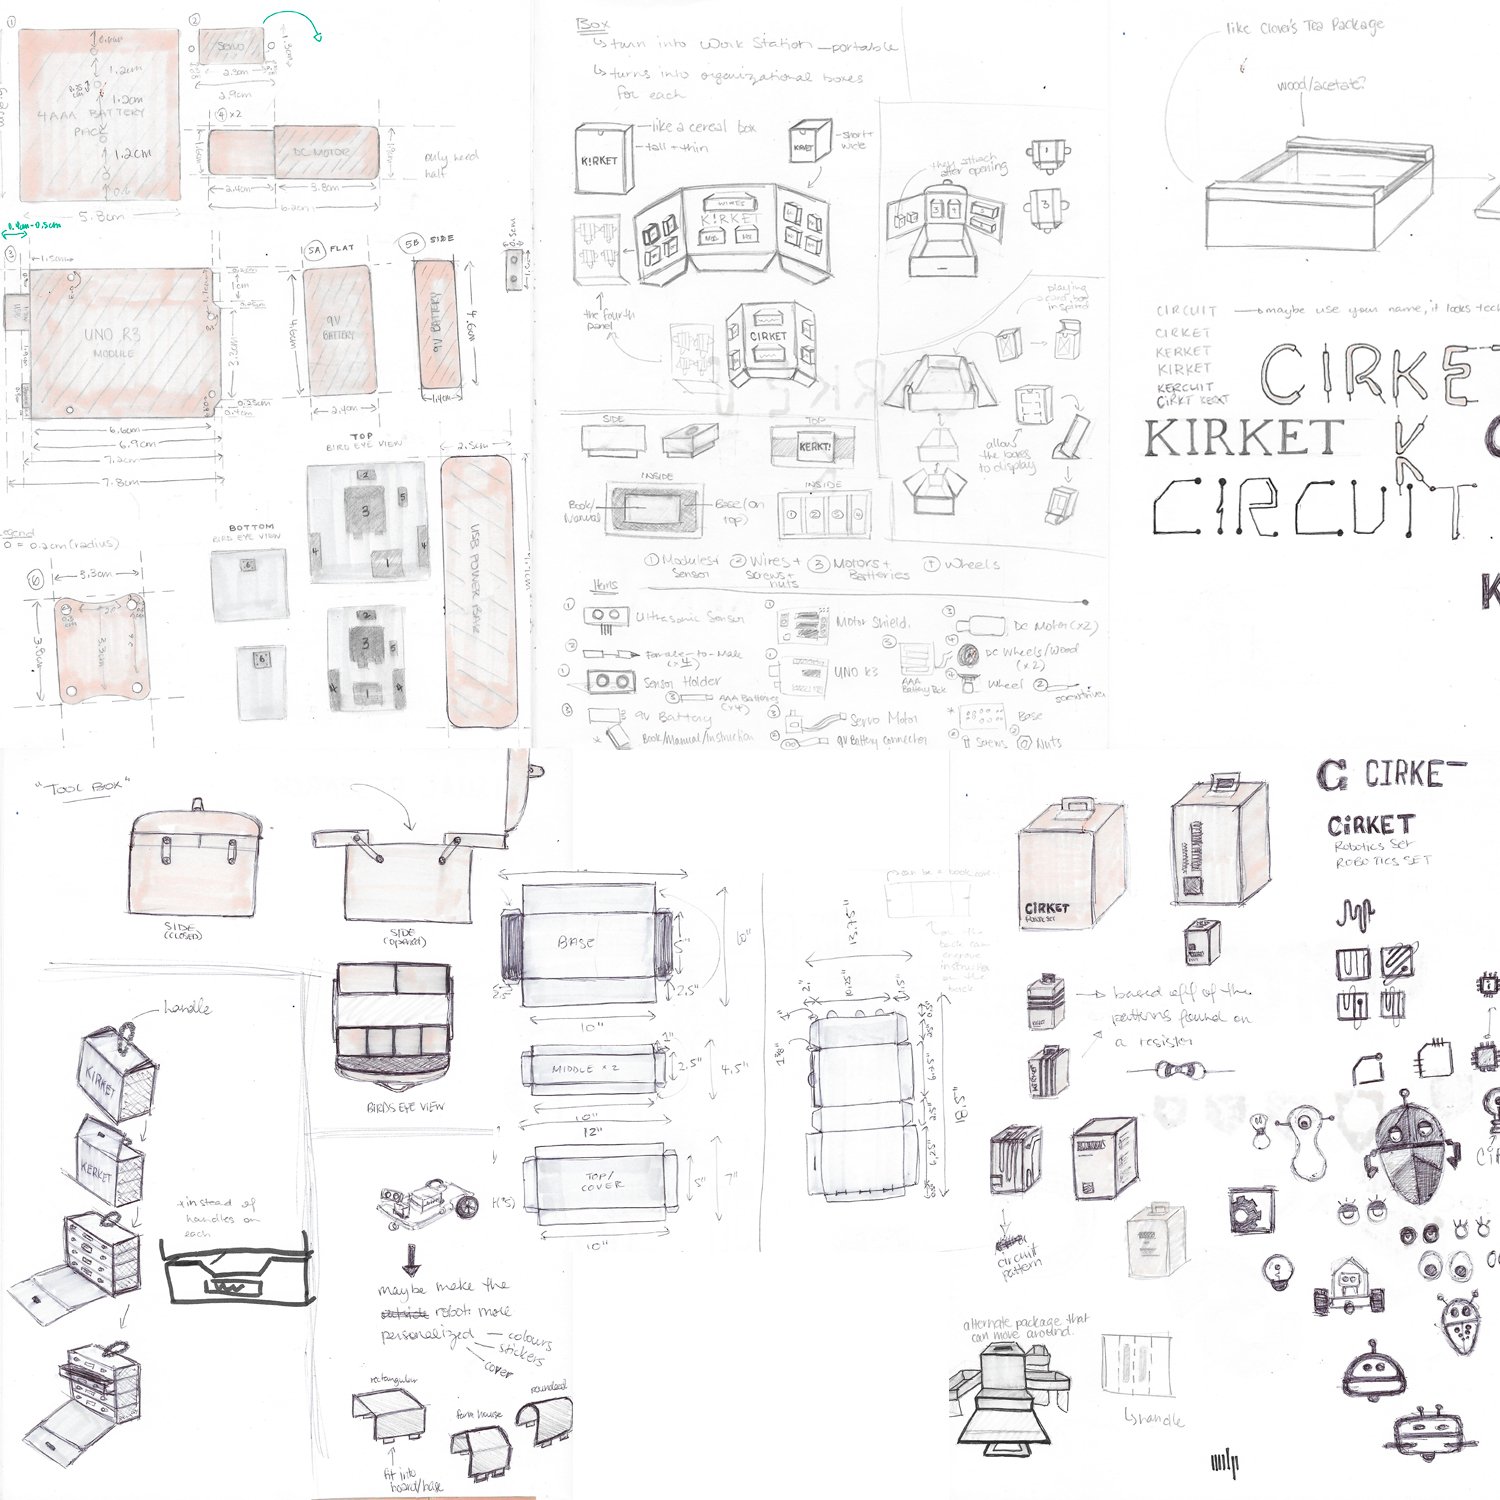 Early sketches and iterations of the package.